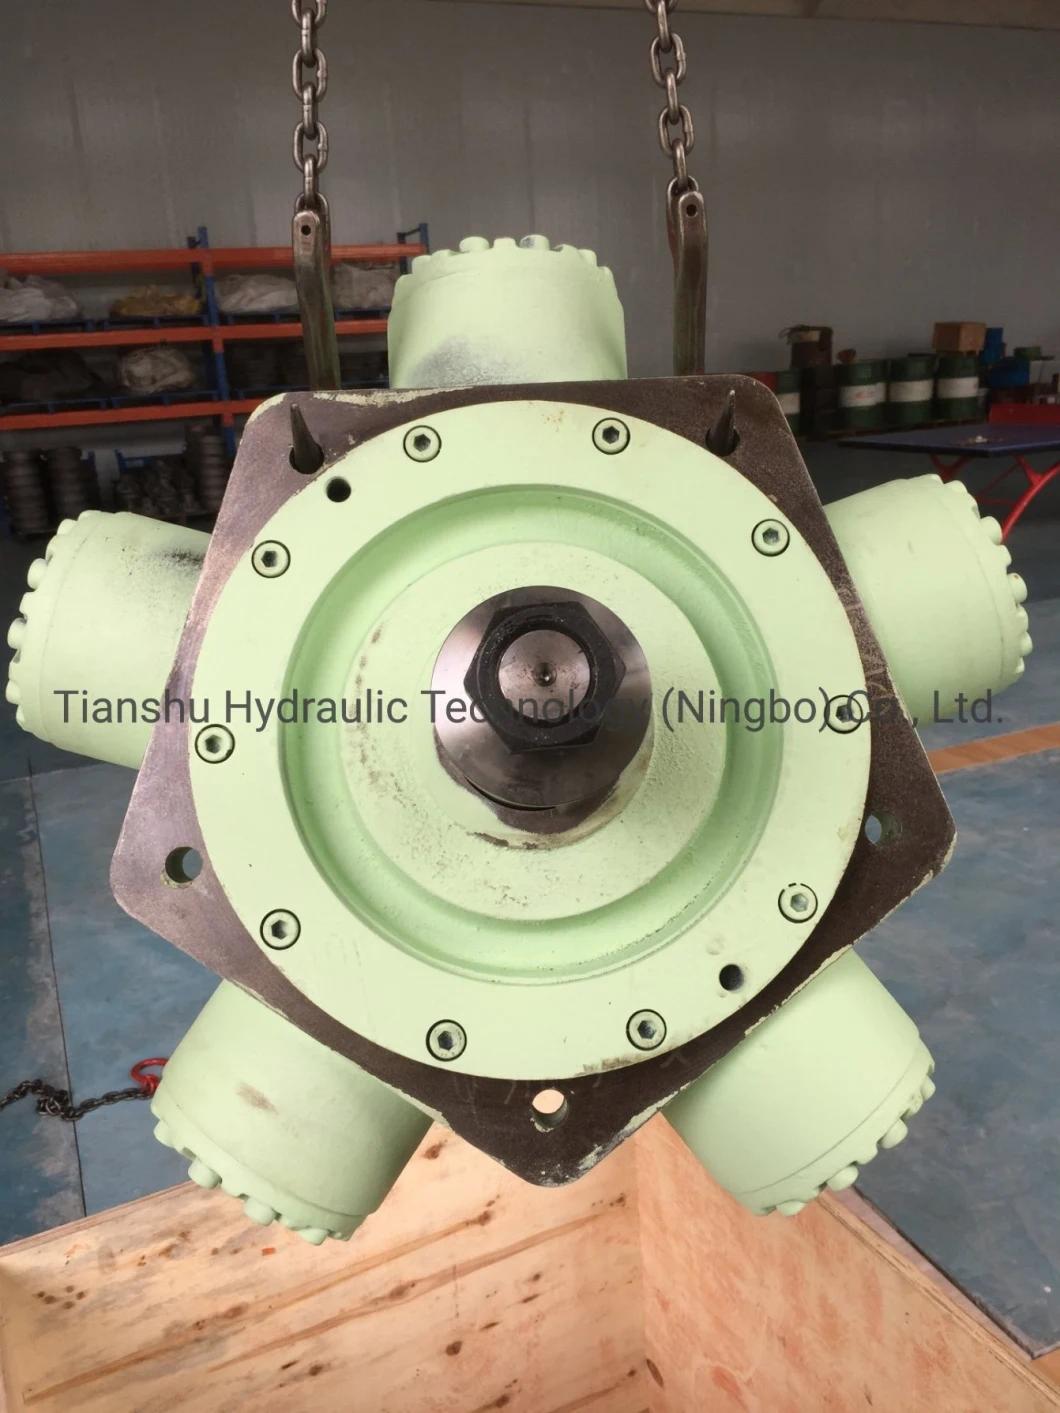 Single Speed Fix and Replacement for Kawasaki Staffa Hmb150 Hmb200 Hmb270 Hmb325 Hmb400 Hmb700 Hydraulic Motor